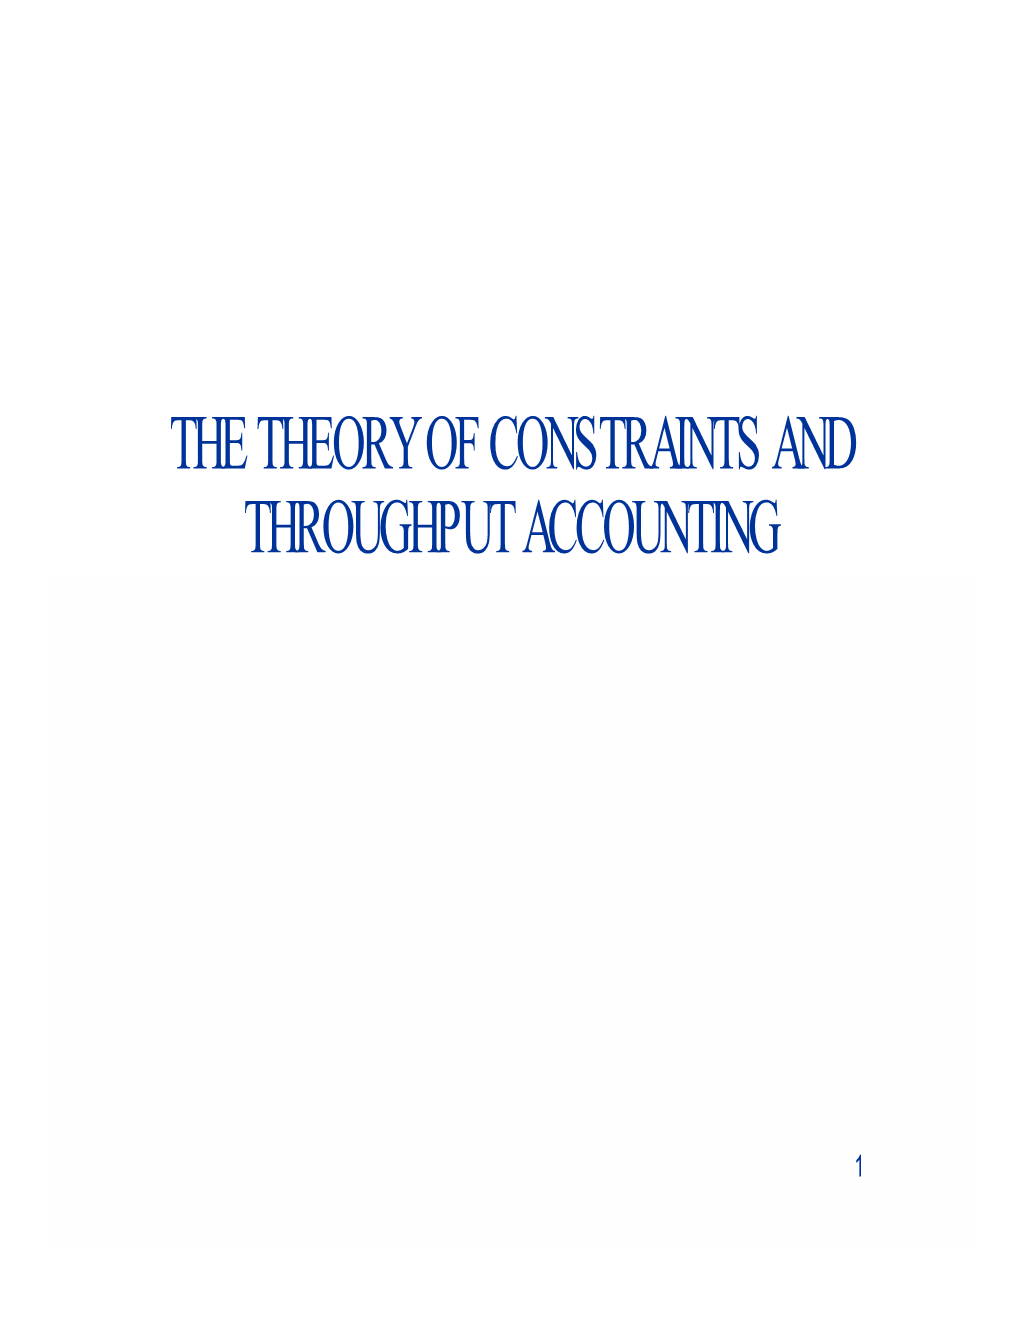 The Theory of Constraints and Throughput Accounting